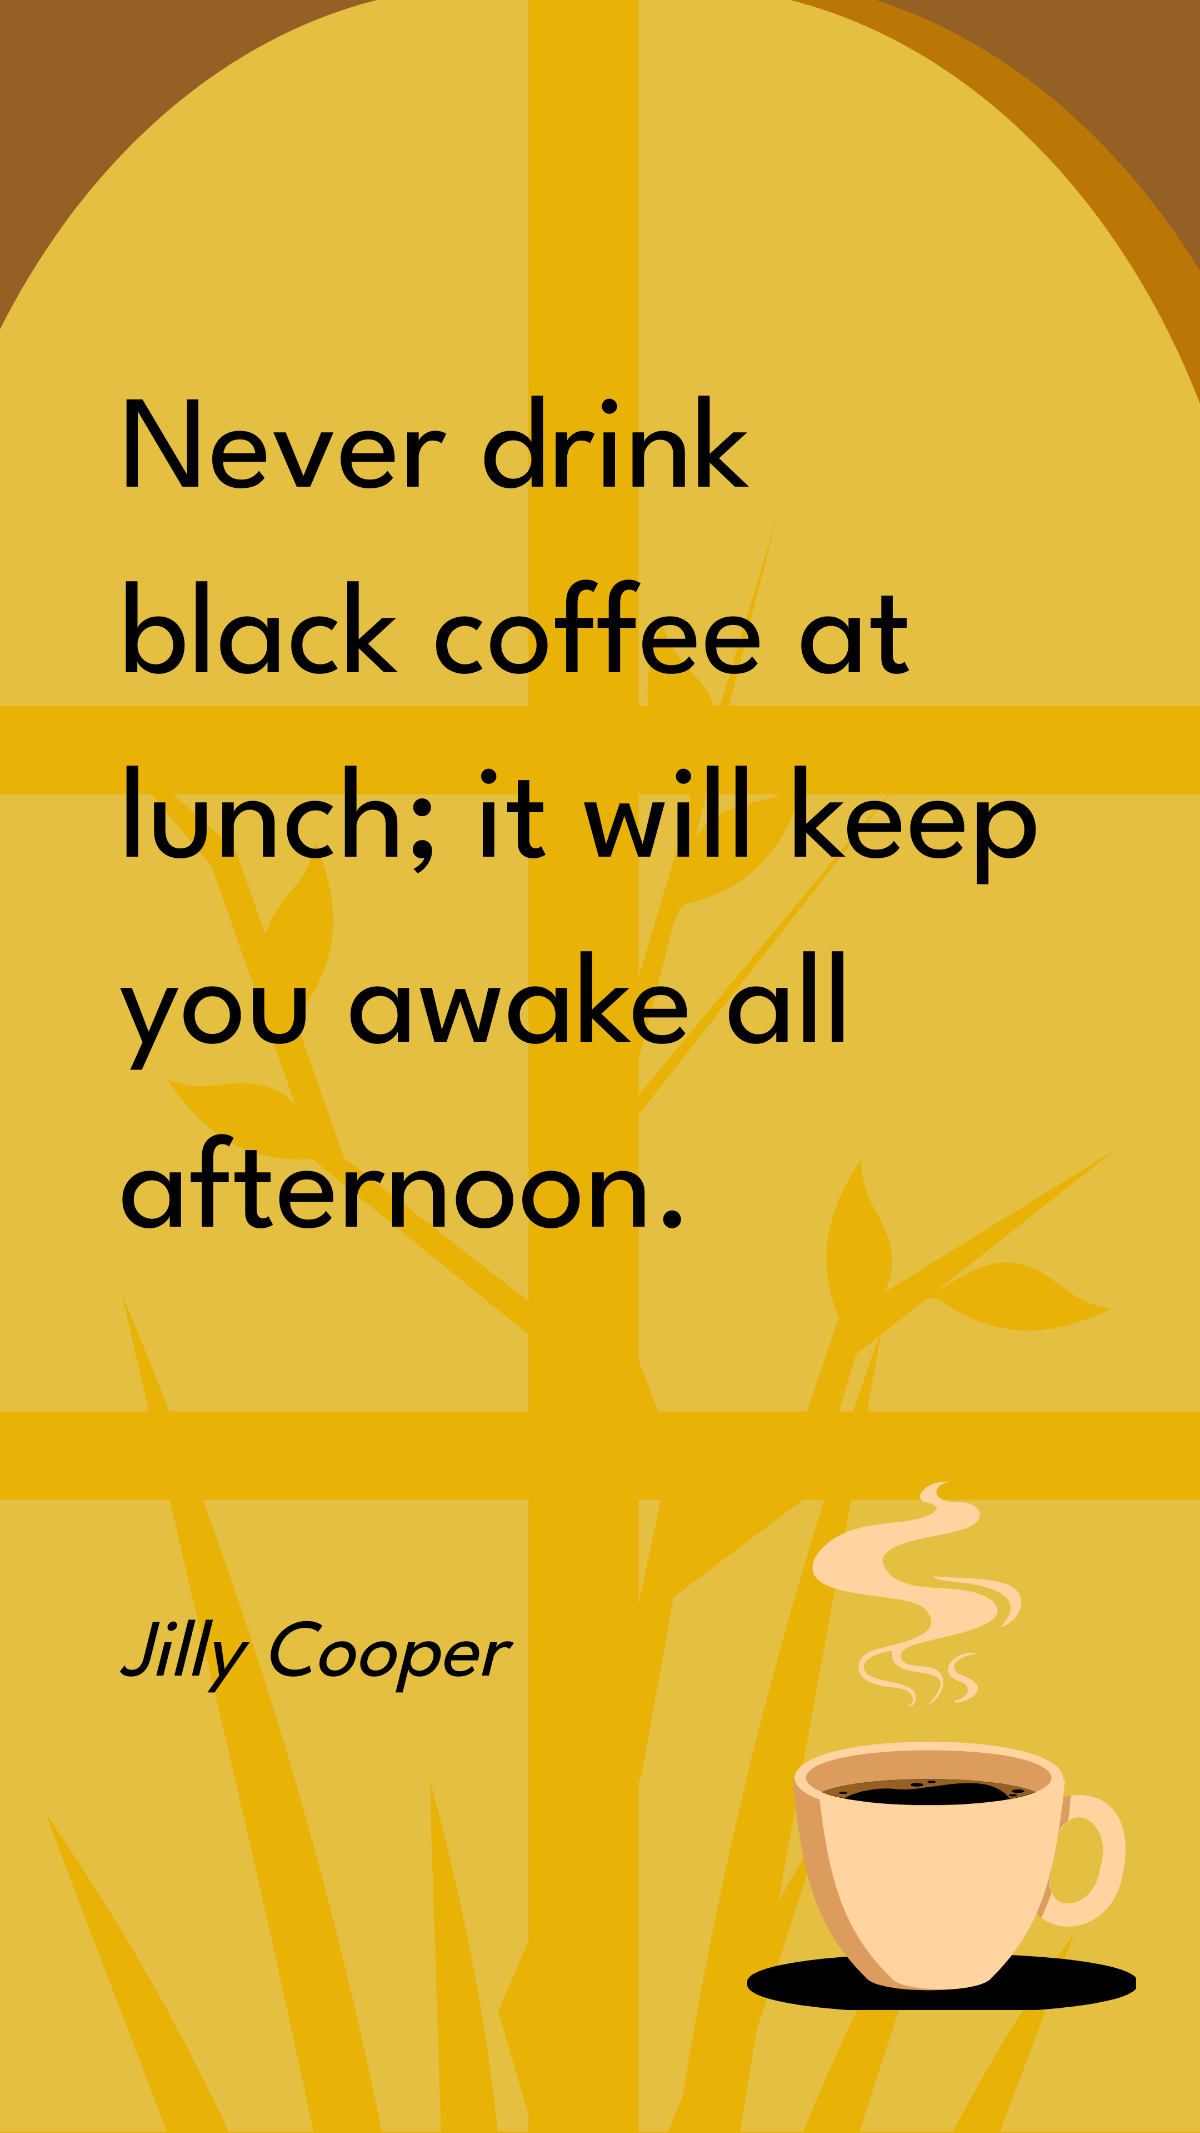 Jilly Cooper - Never drink black coffee at lunch; it will keep you awake all afternoon.